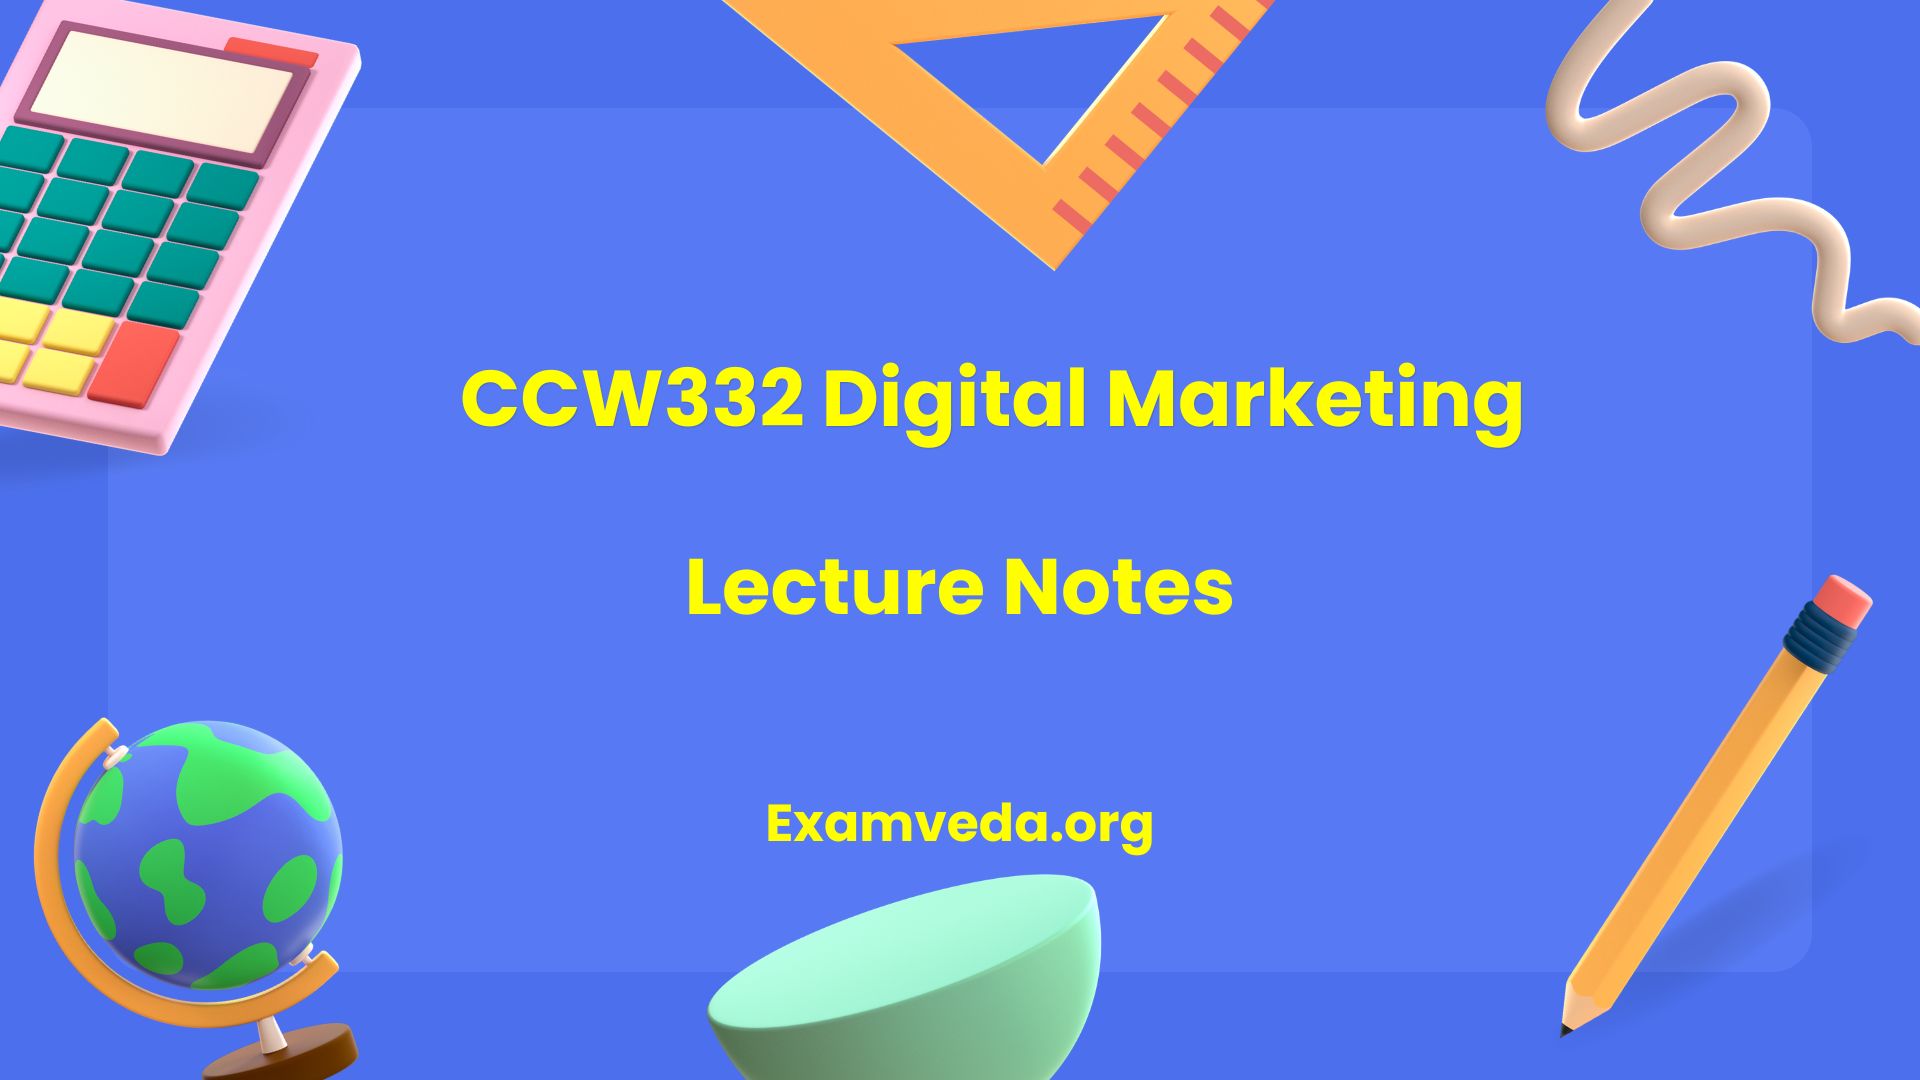 CCW332 Digital Marketing Lecture Notes